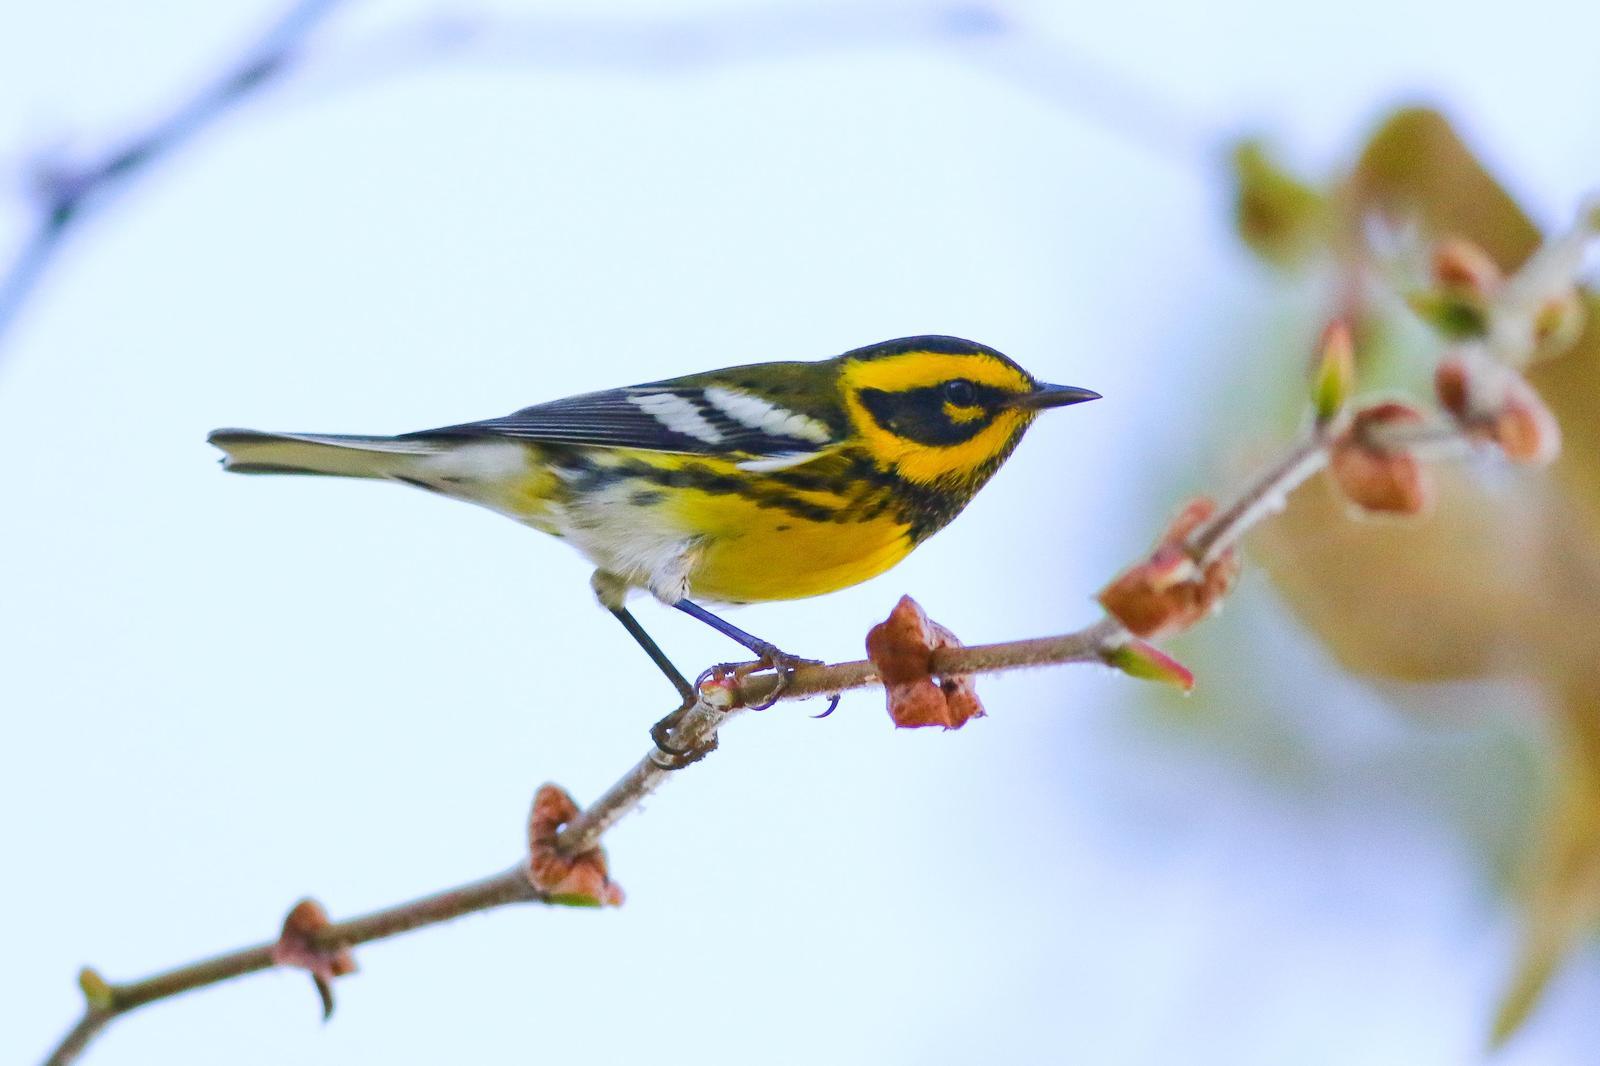 Townsend's Warbler Photo by Tom Ford-Hutchinson